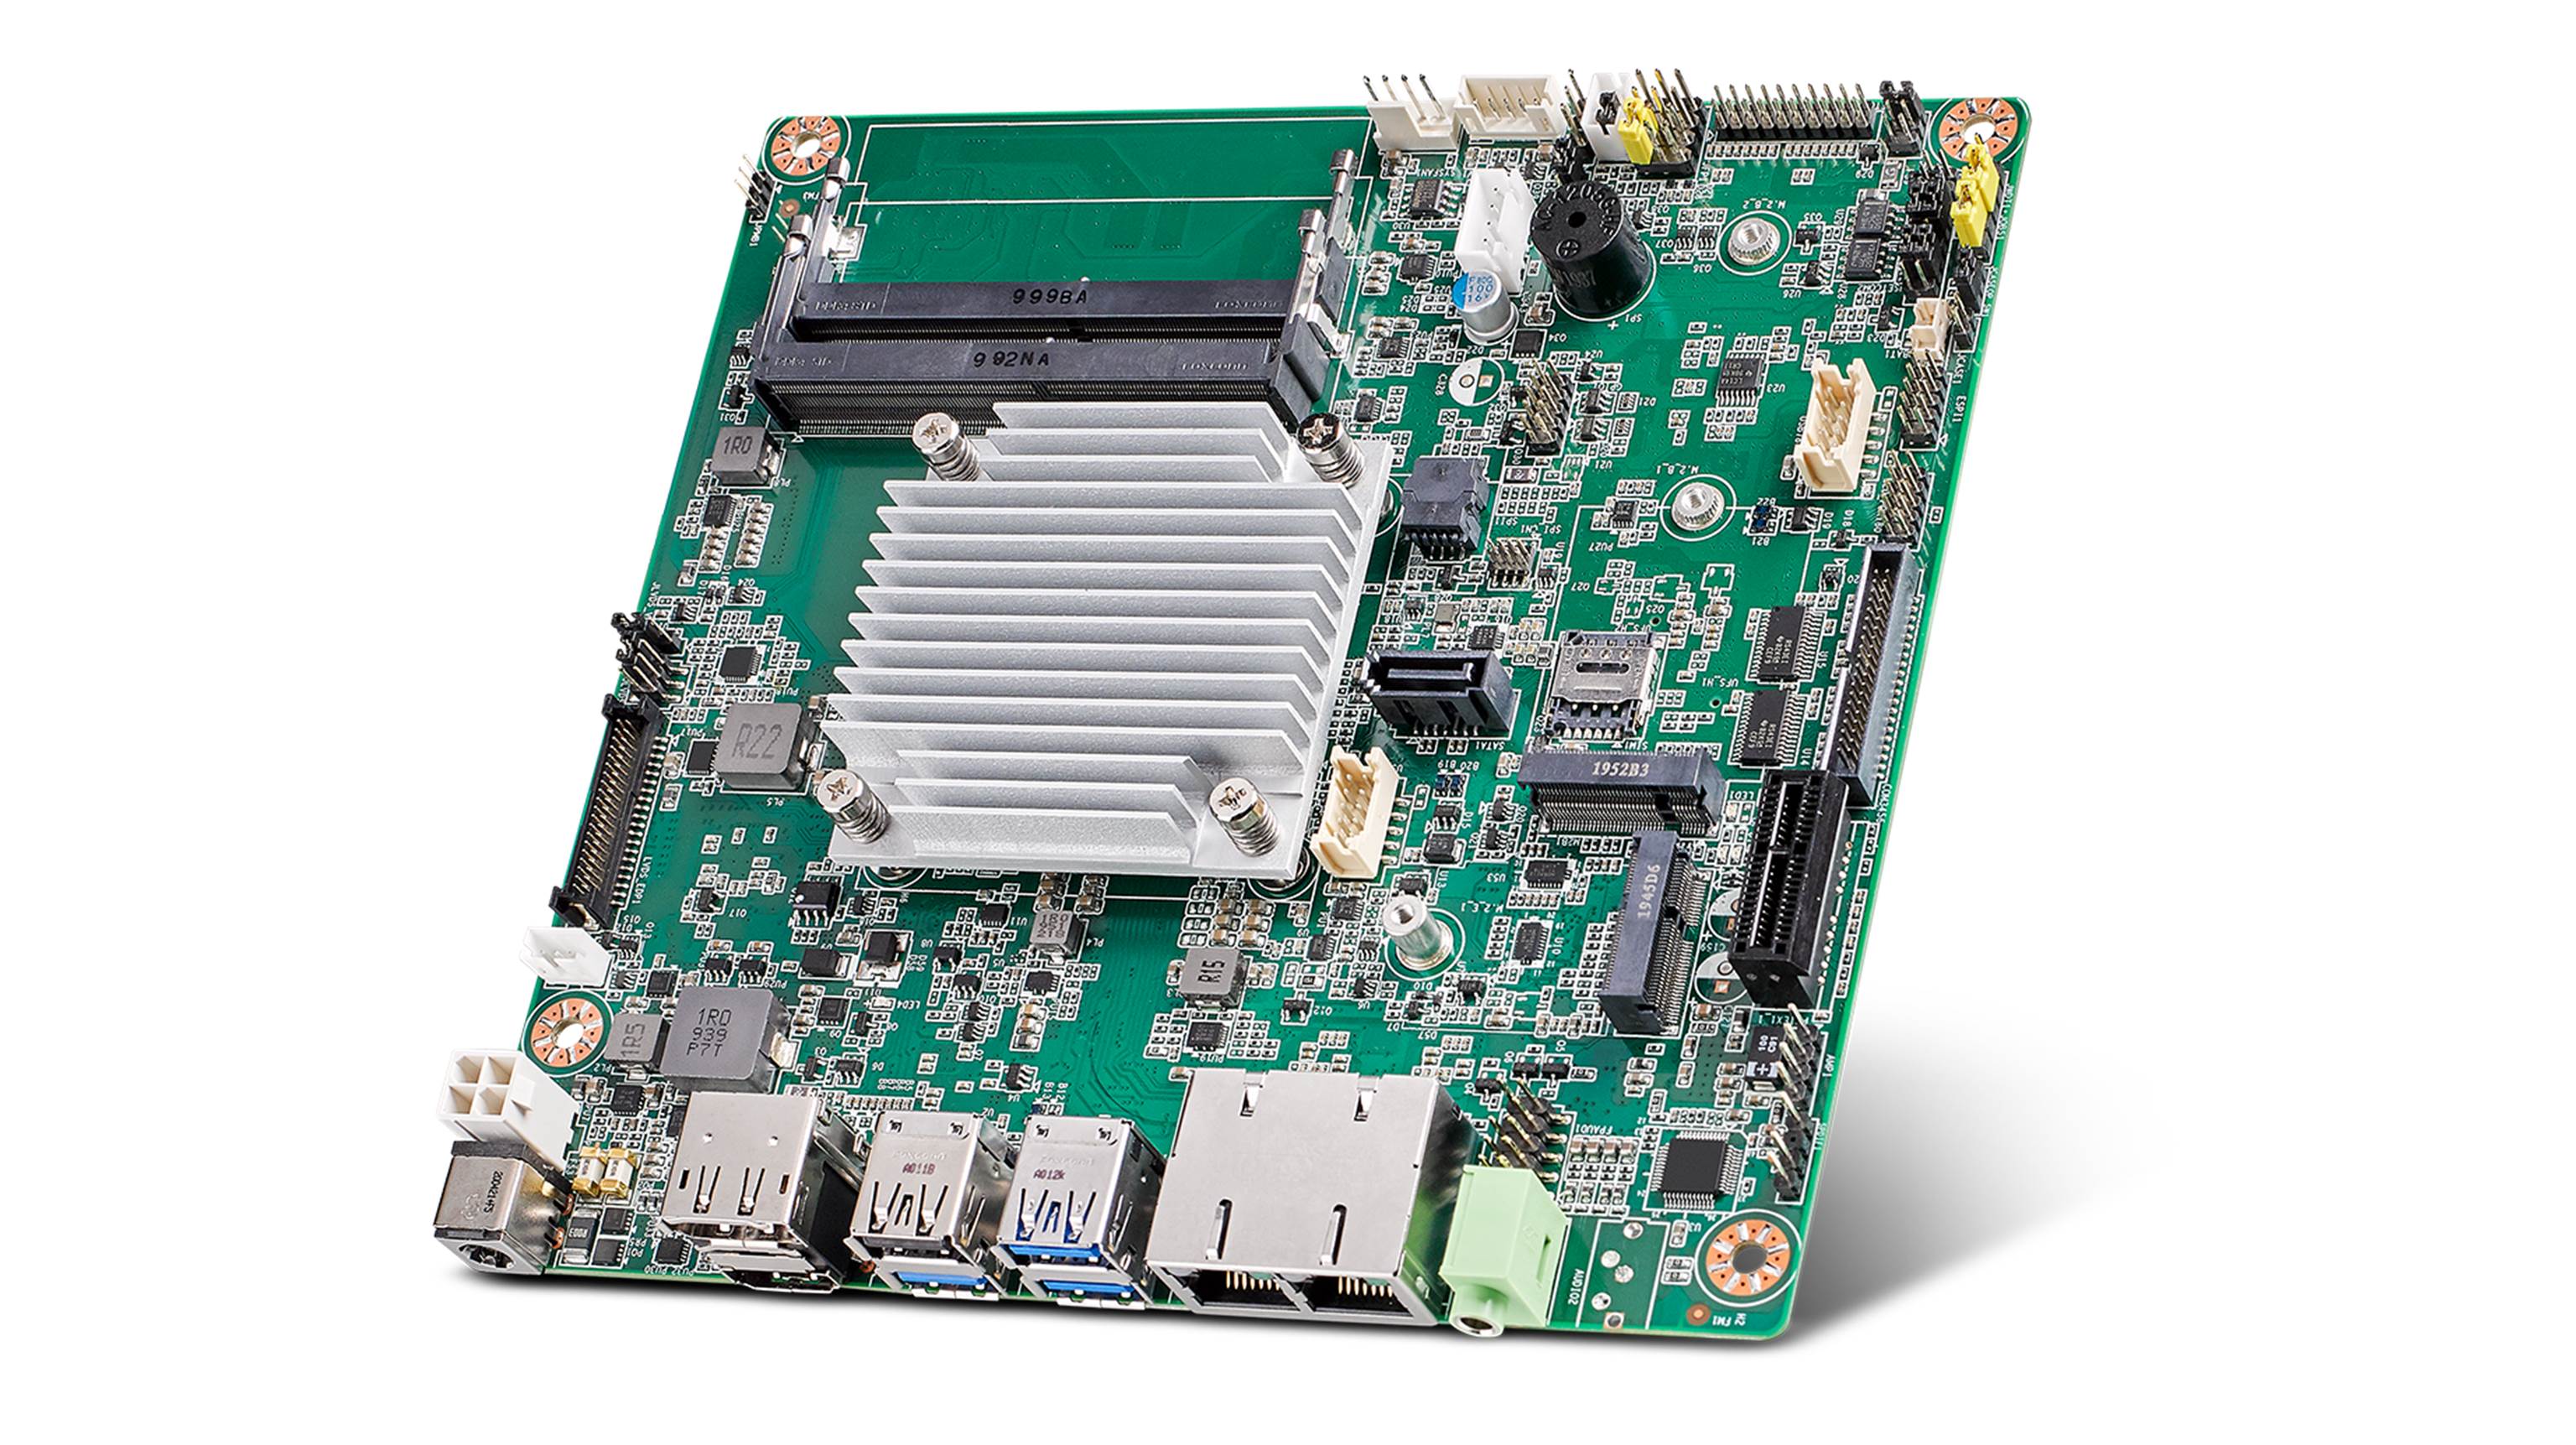 Mini ITX-H25-28 Intel Atom N2800 Embedded Industrial Motherboard with 6 COM Motherboards and LVDS Mainboard 